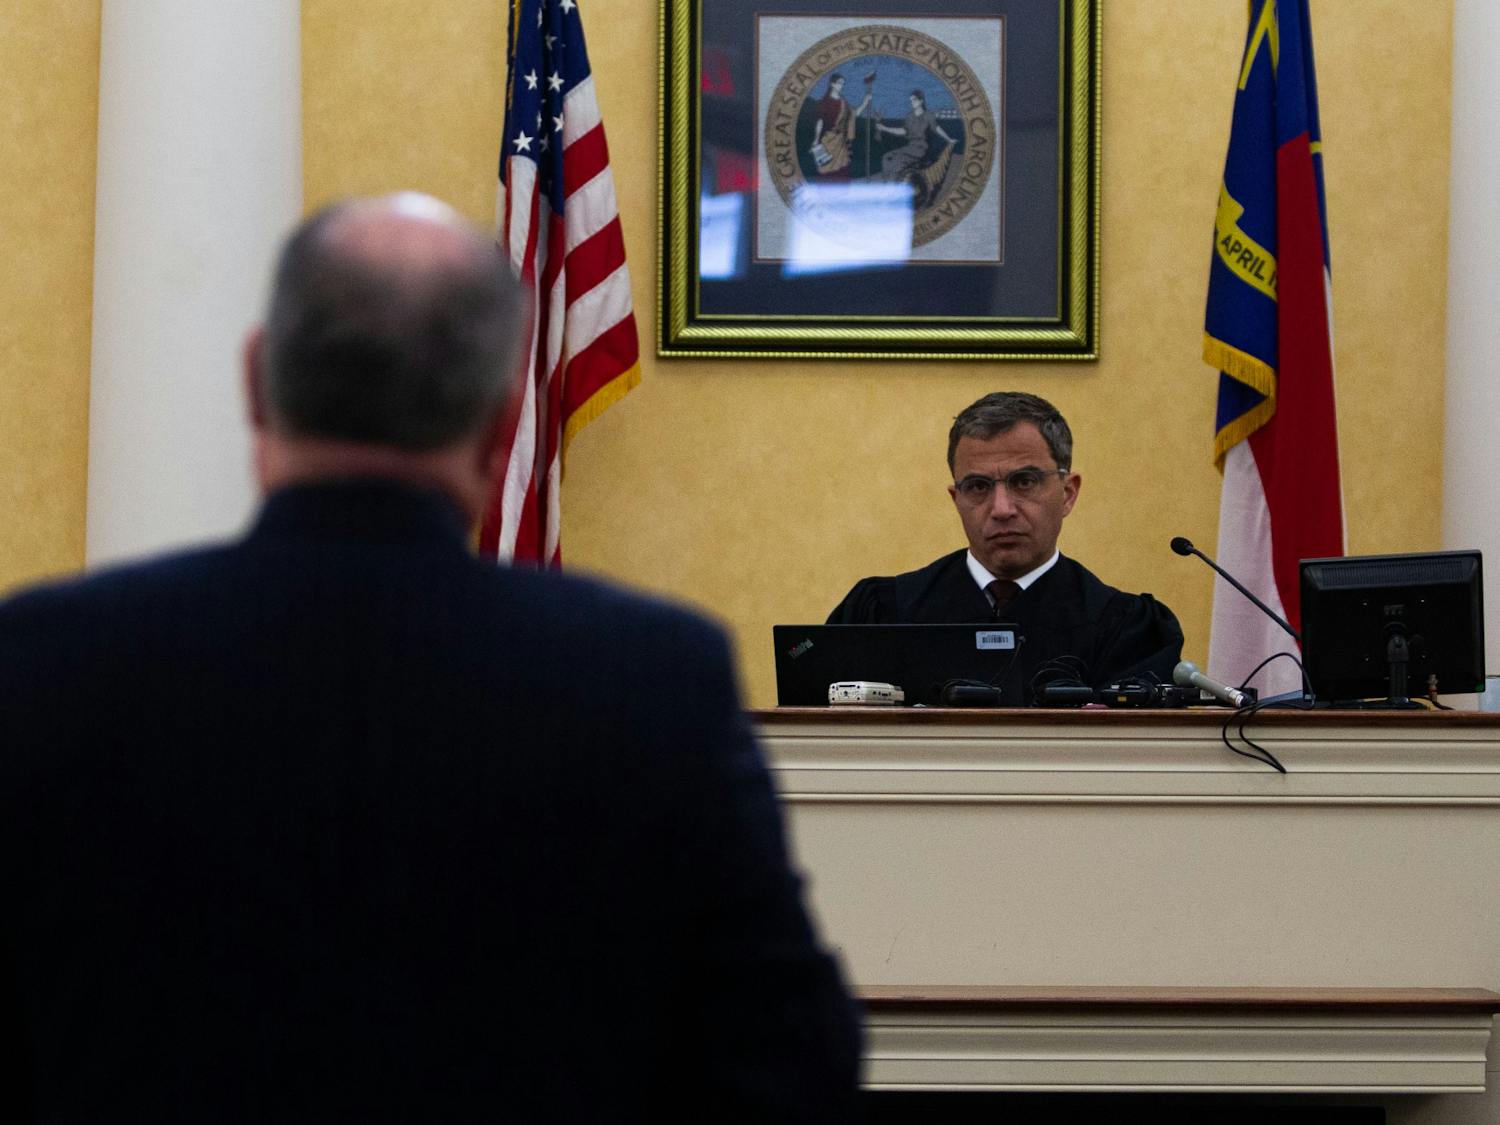 Judge Allen Baddour looks on as Sons of Confederate Veterans Inc's lawyer Boyd Sturges speaks during a hearing in the Orange County Courthouse in Hillsborough on Wednesday, Feb. 12, 2020.&nbsp;